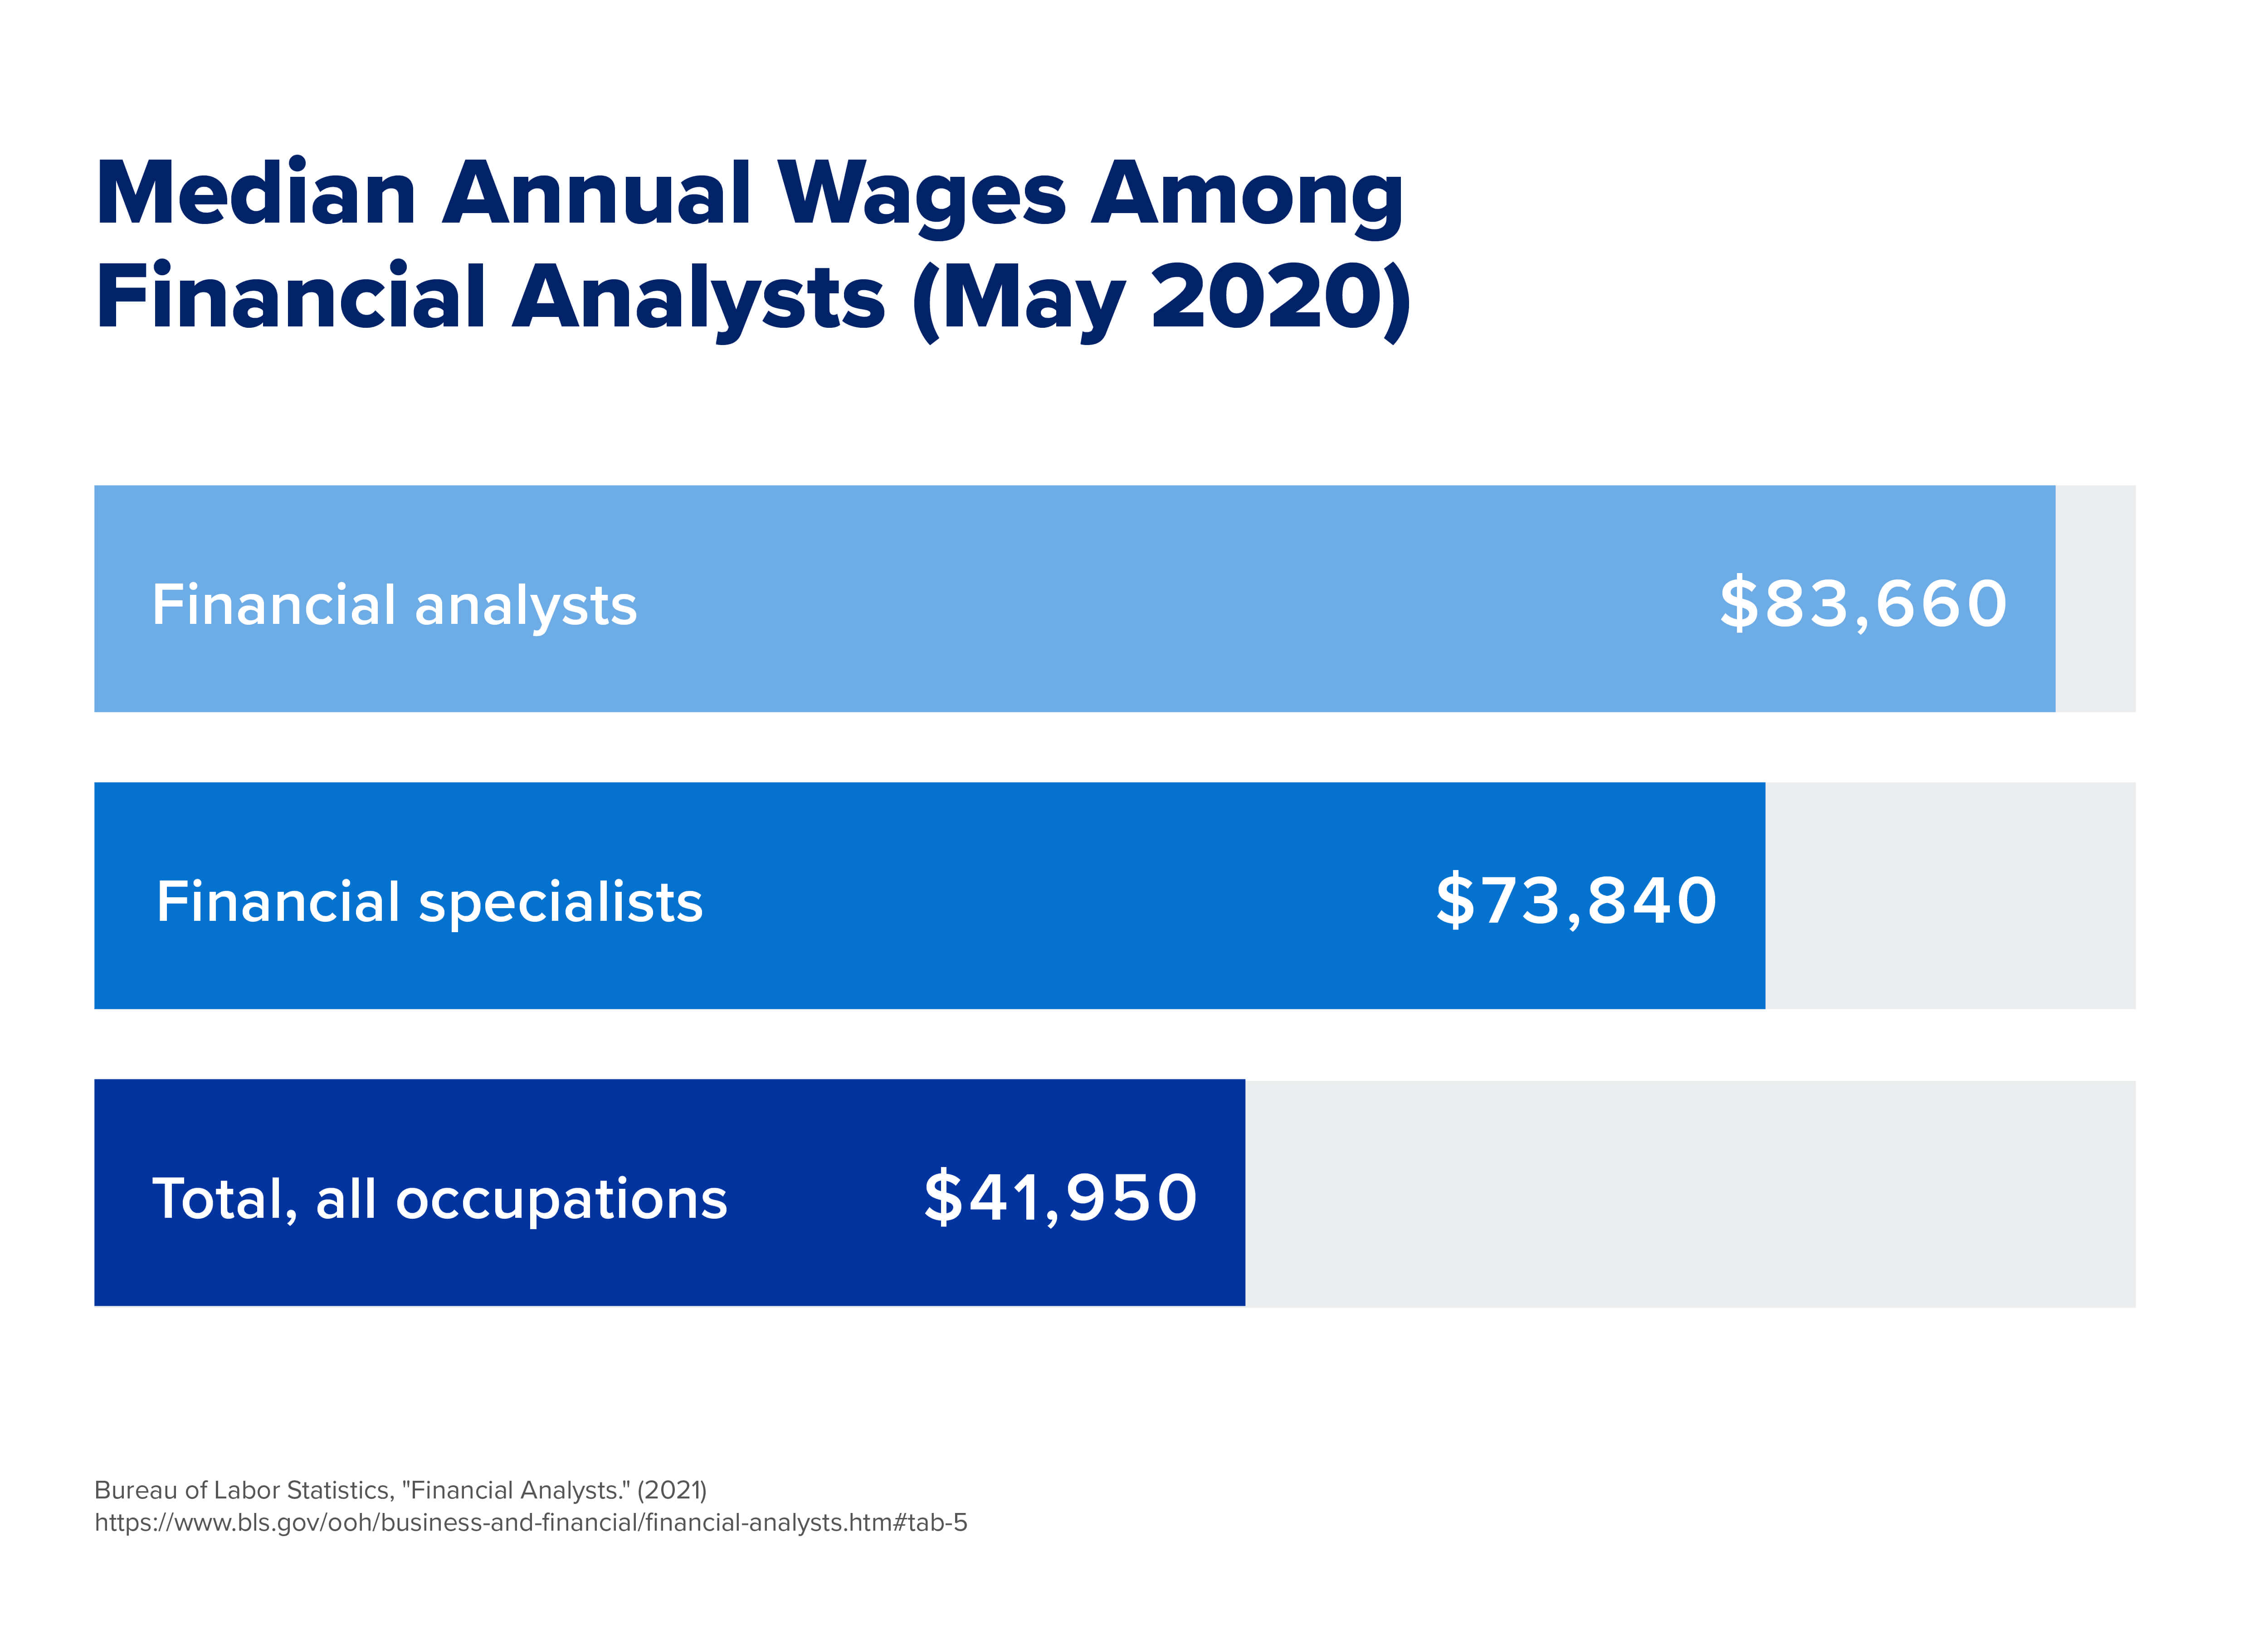 A chart comparing the median annual wages among financial analysts.